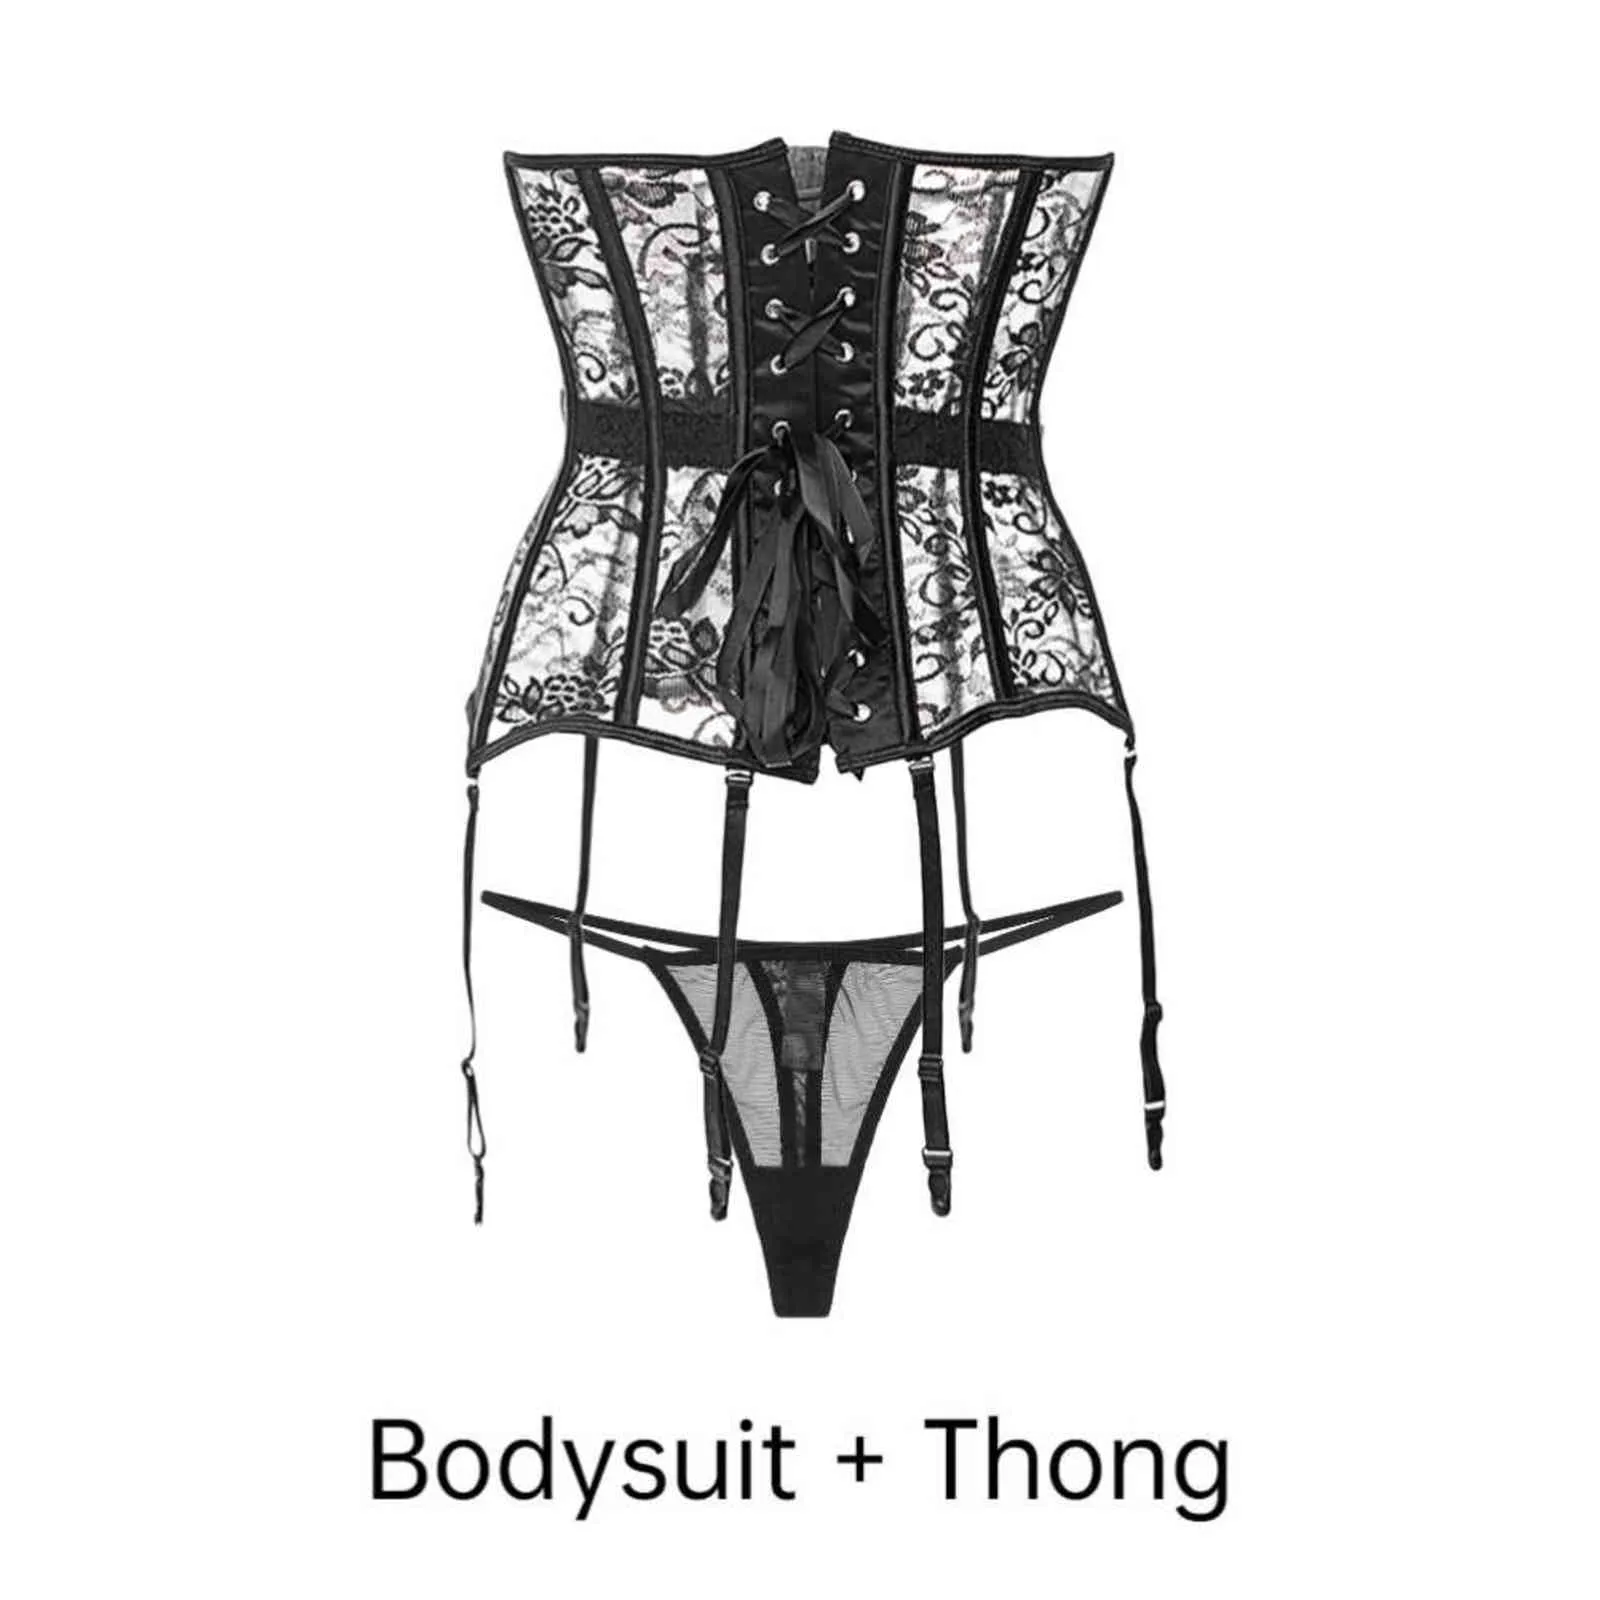 Varsbaby Lace Waist Trainer Bodysuit Set Slim Fit Maidenform Corset And  Stockings For Women In Black Sizes S XXL From Kong04, $13.33